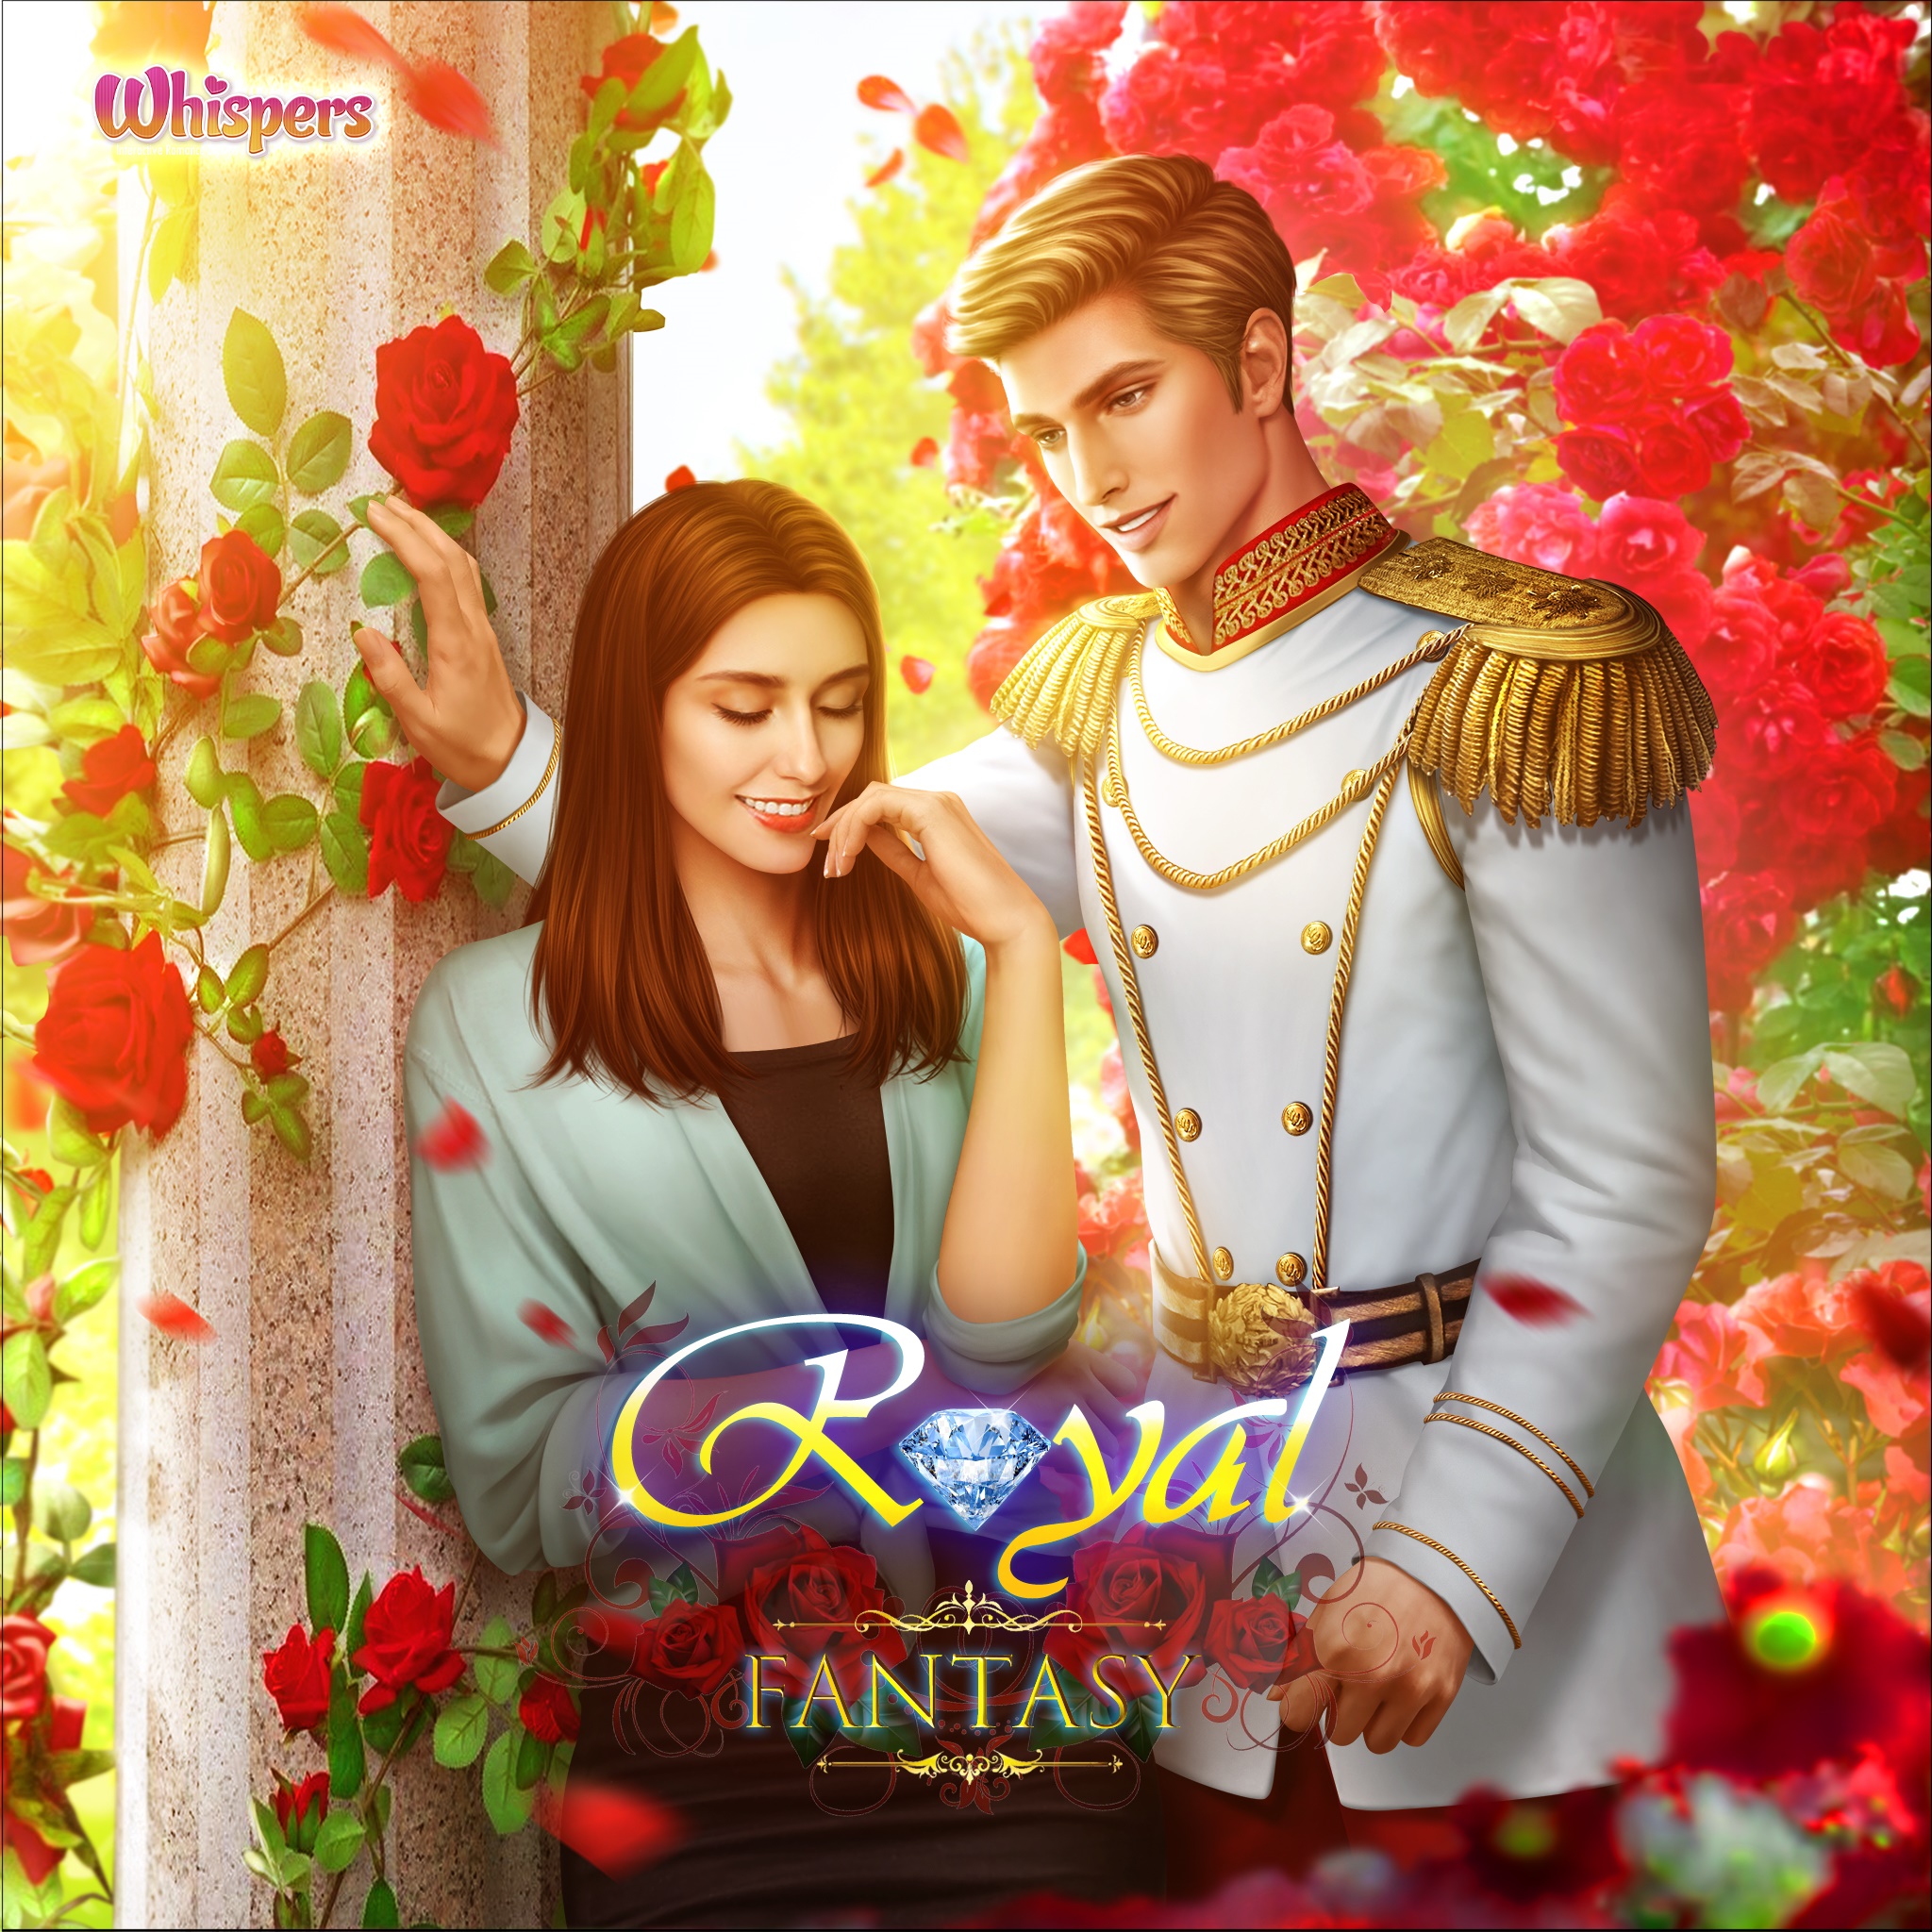 Royal Fantasy, Whispers: Interactive Romance Stories Wiki